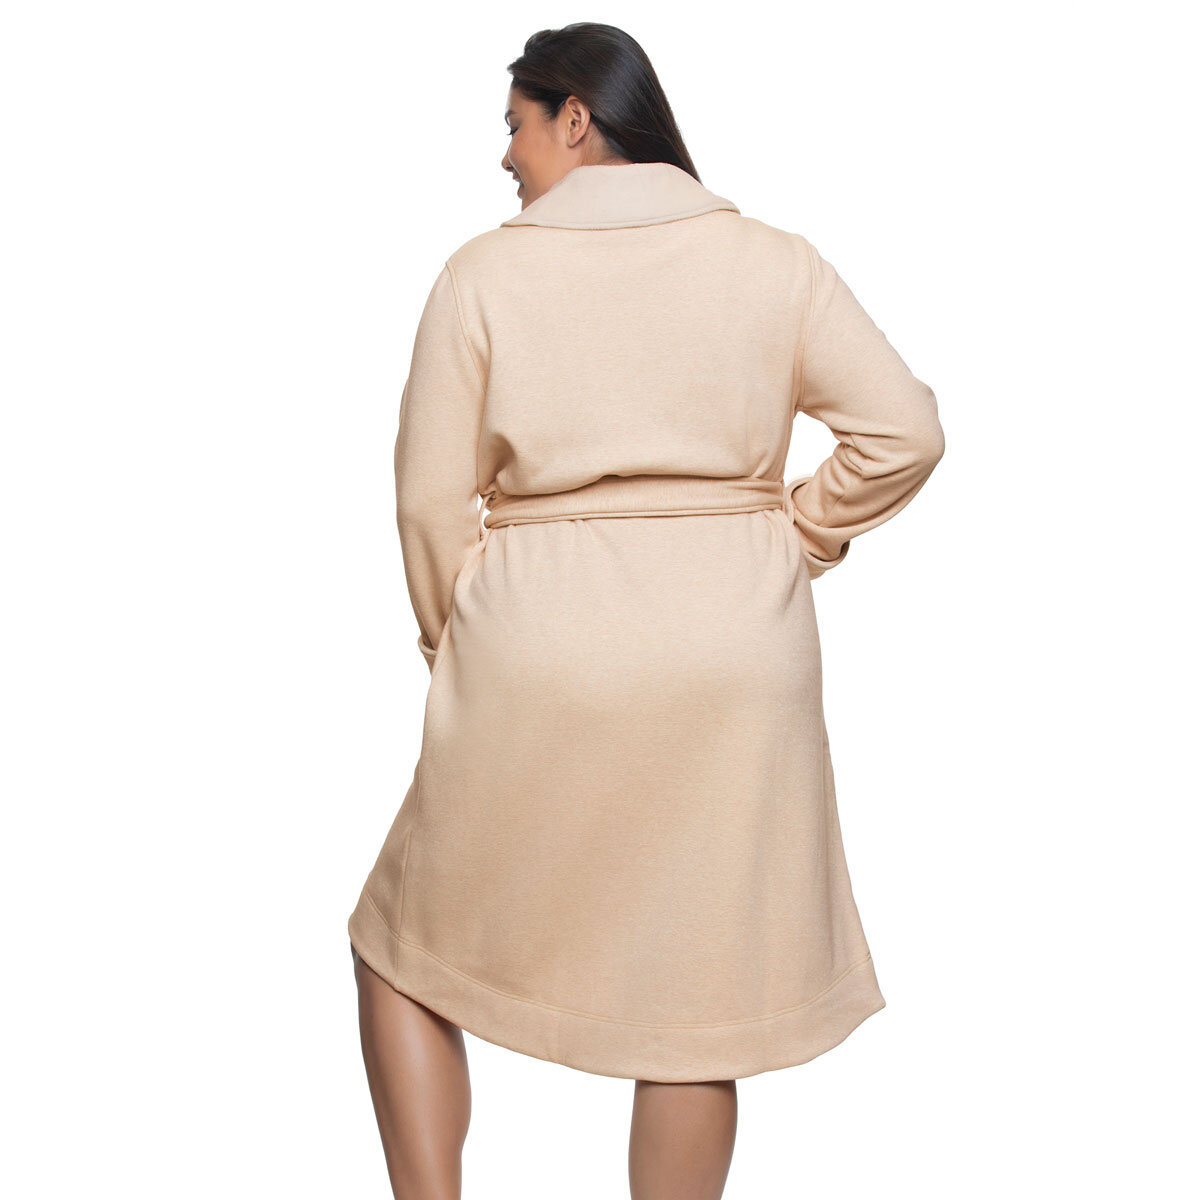 Kirkland Signature Women's Robe in 2 Colours and 4 Sizes